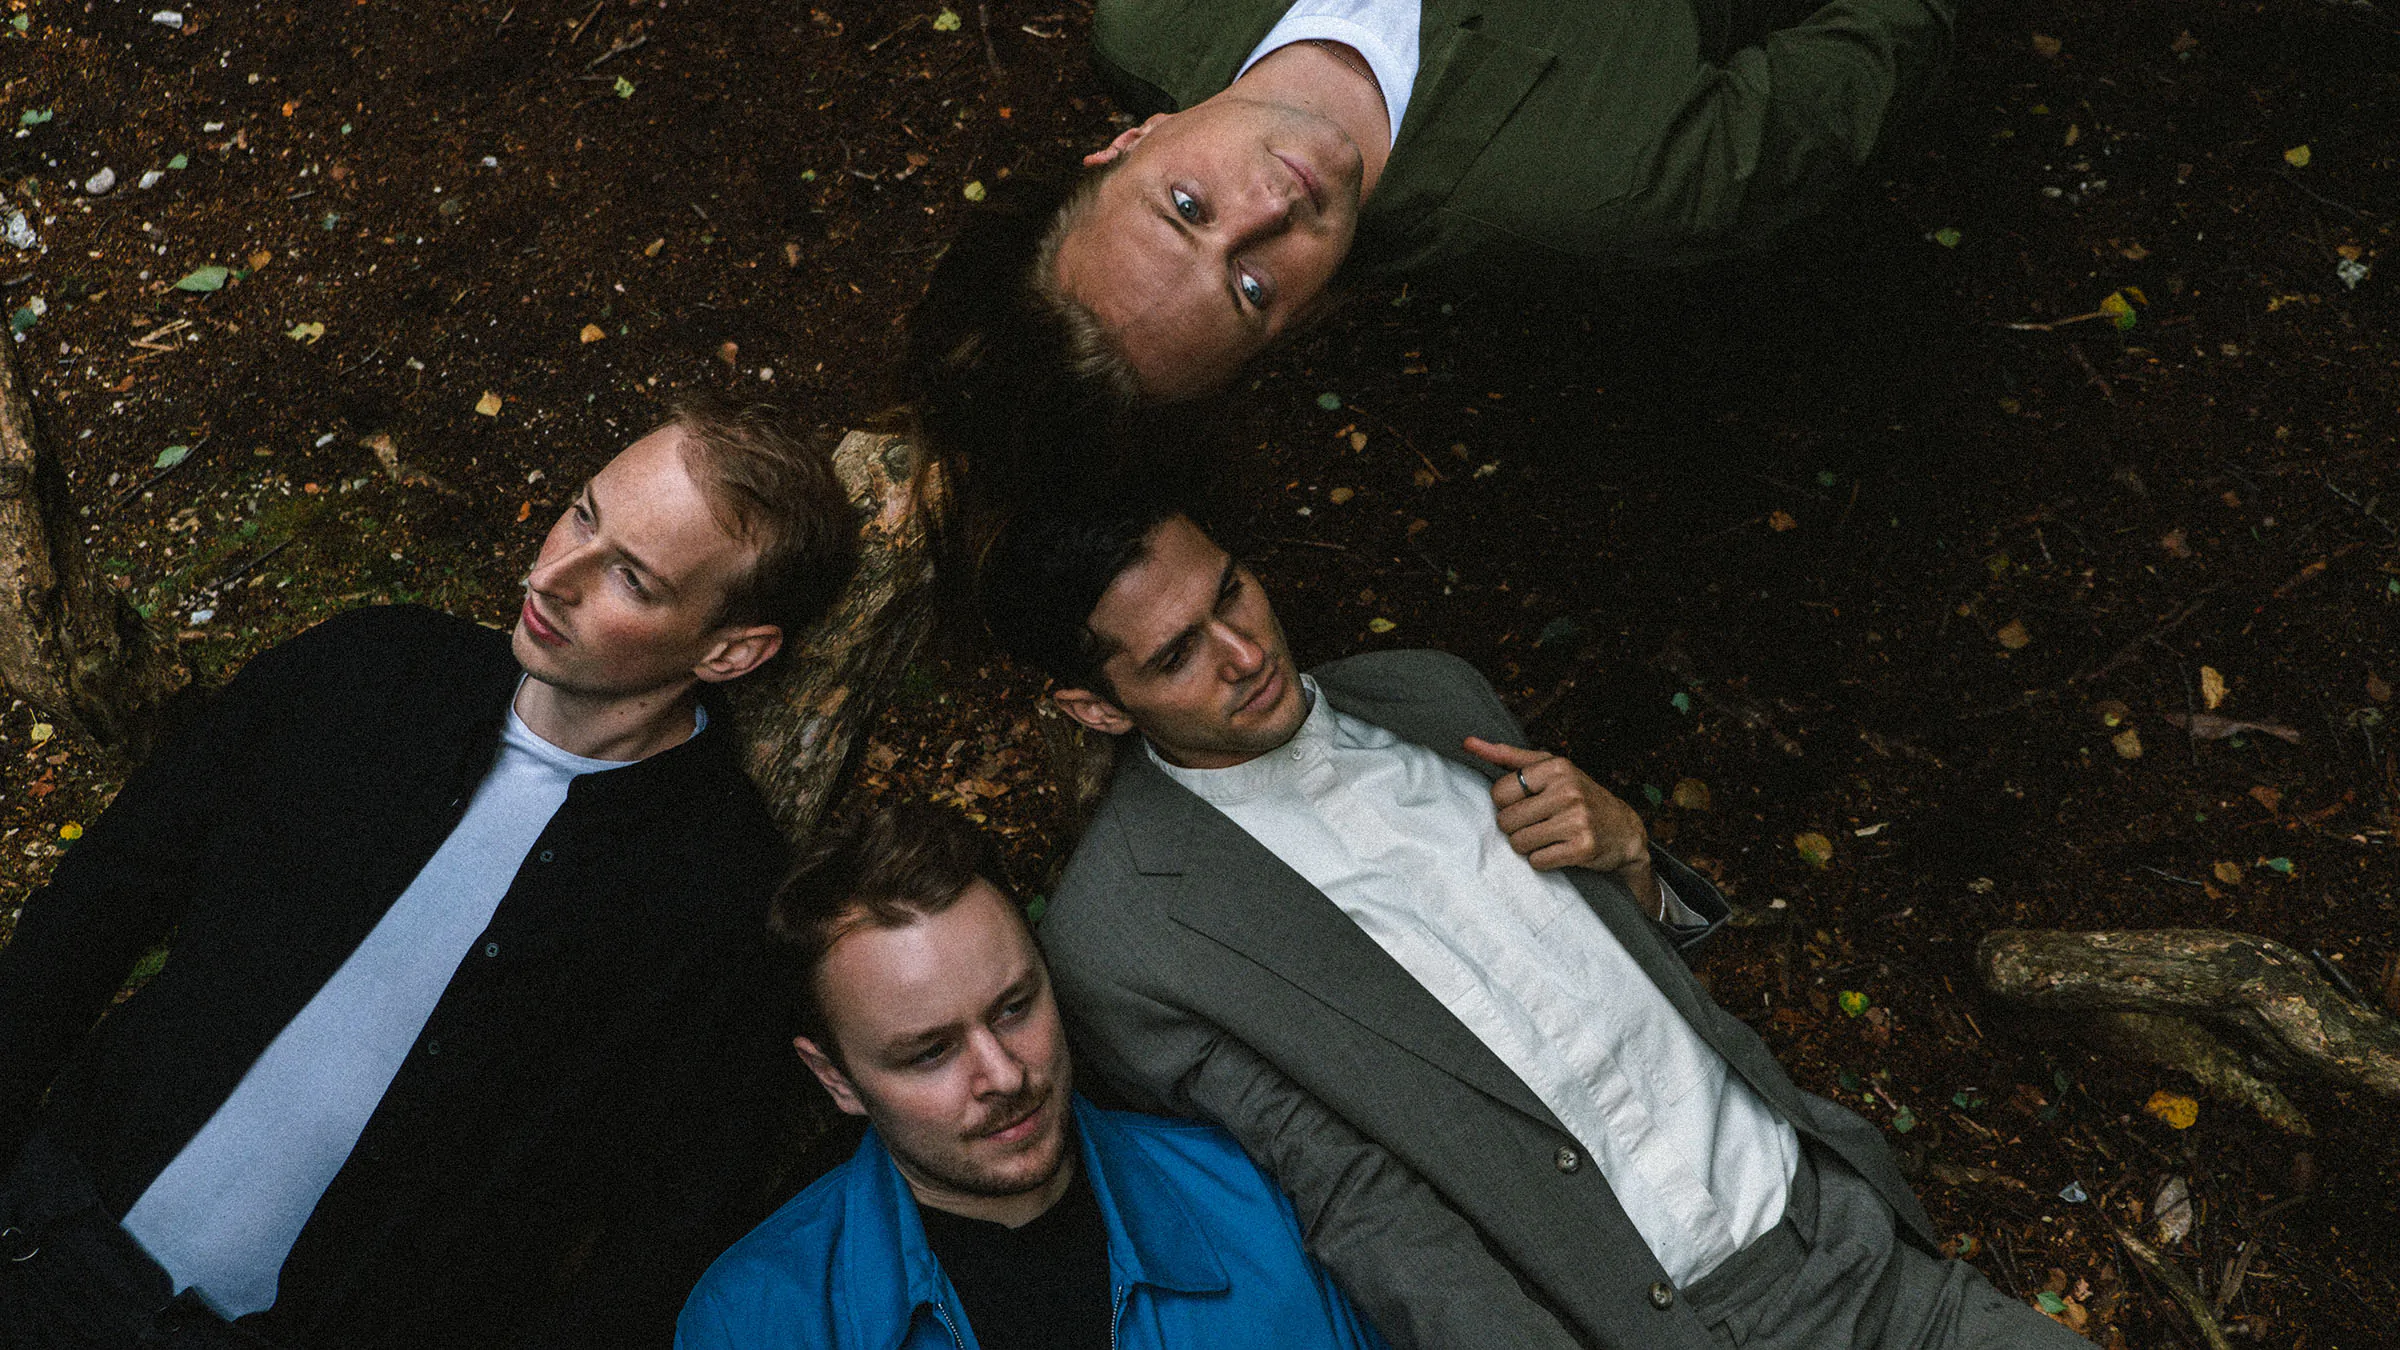 LOW ISLAND announce debut album ‘If You Could Have It All Again’ – out 16th April